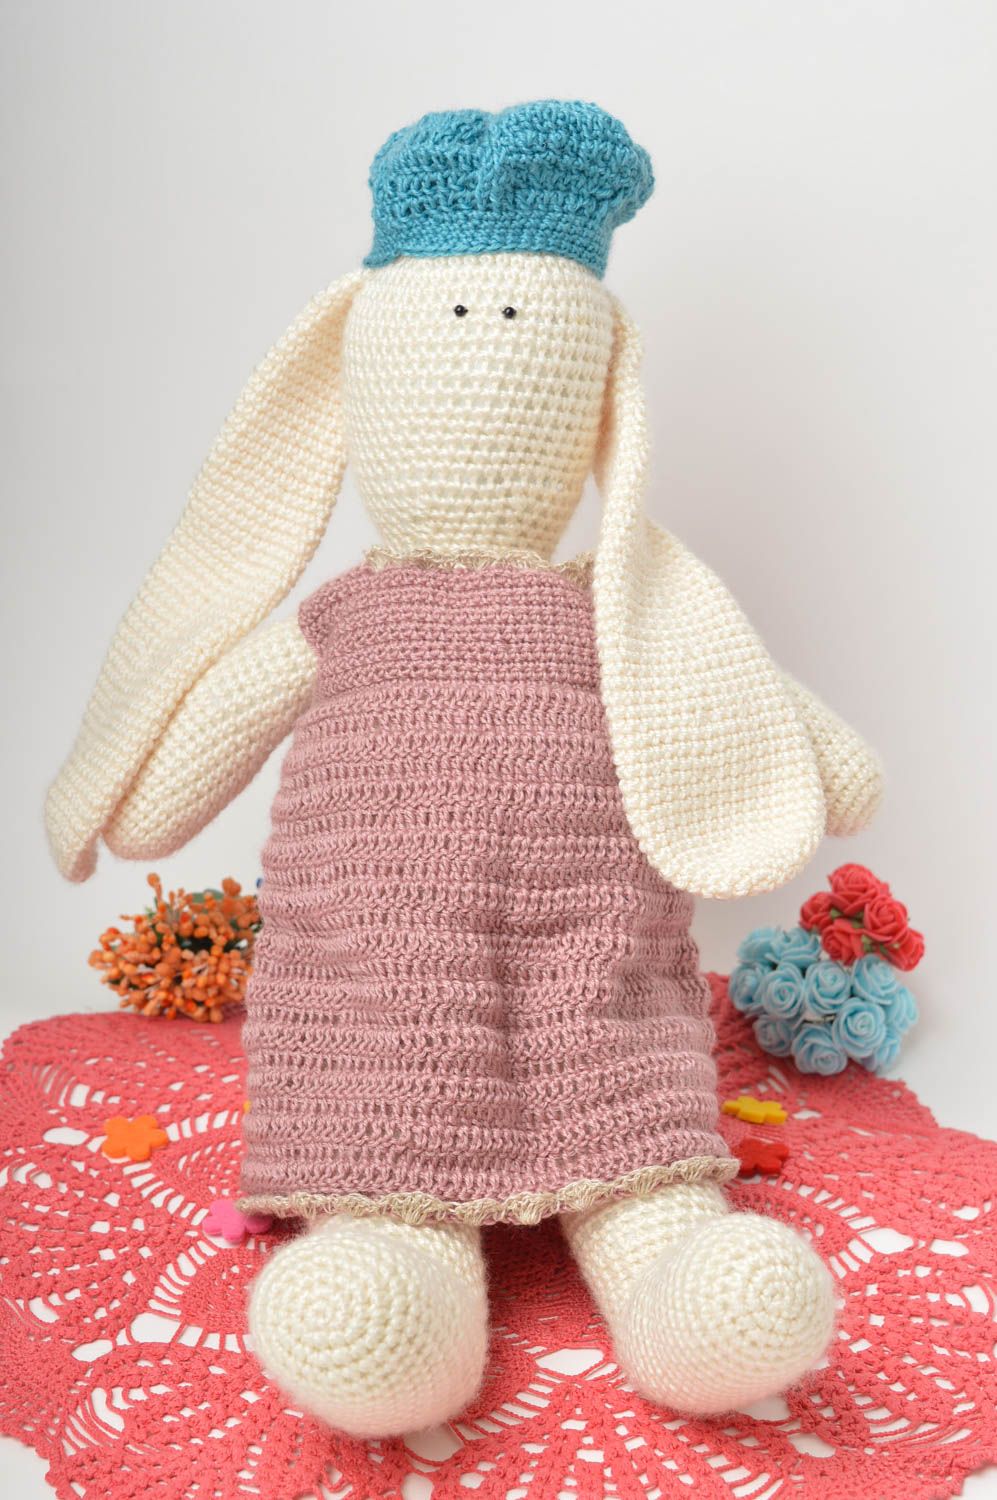 Handmade toy crocheted toy soft toy for kids decorative use only gift ideas photo 1